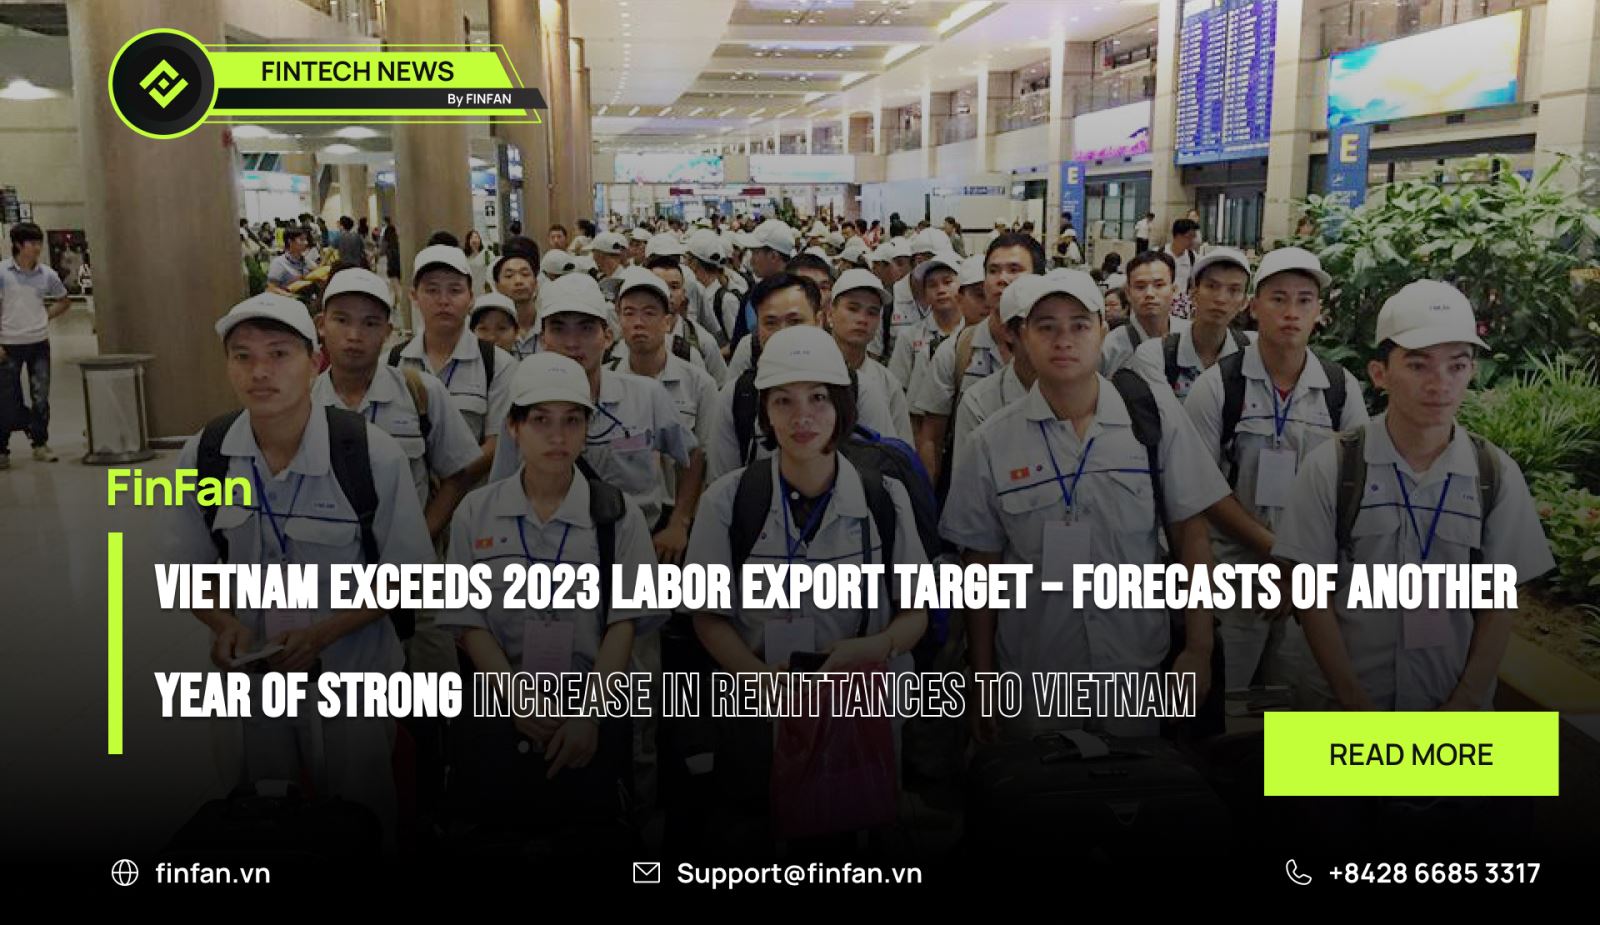 Vietnam exceeds 2023 labor export target – Forecasts of another year of strong increase in remittances to Vietnam